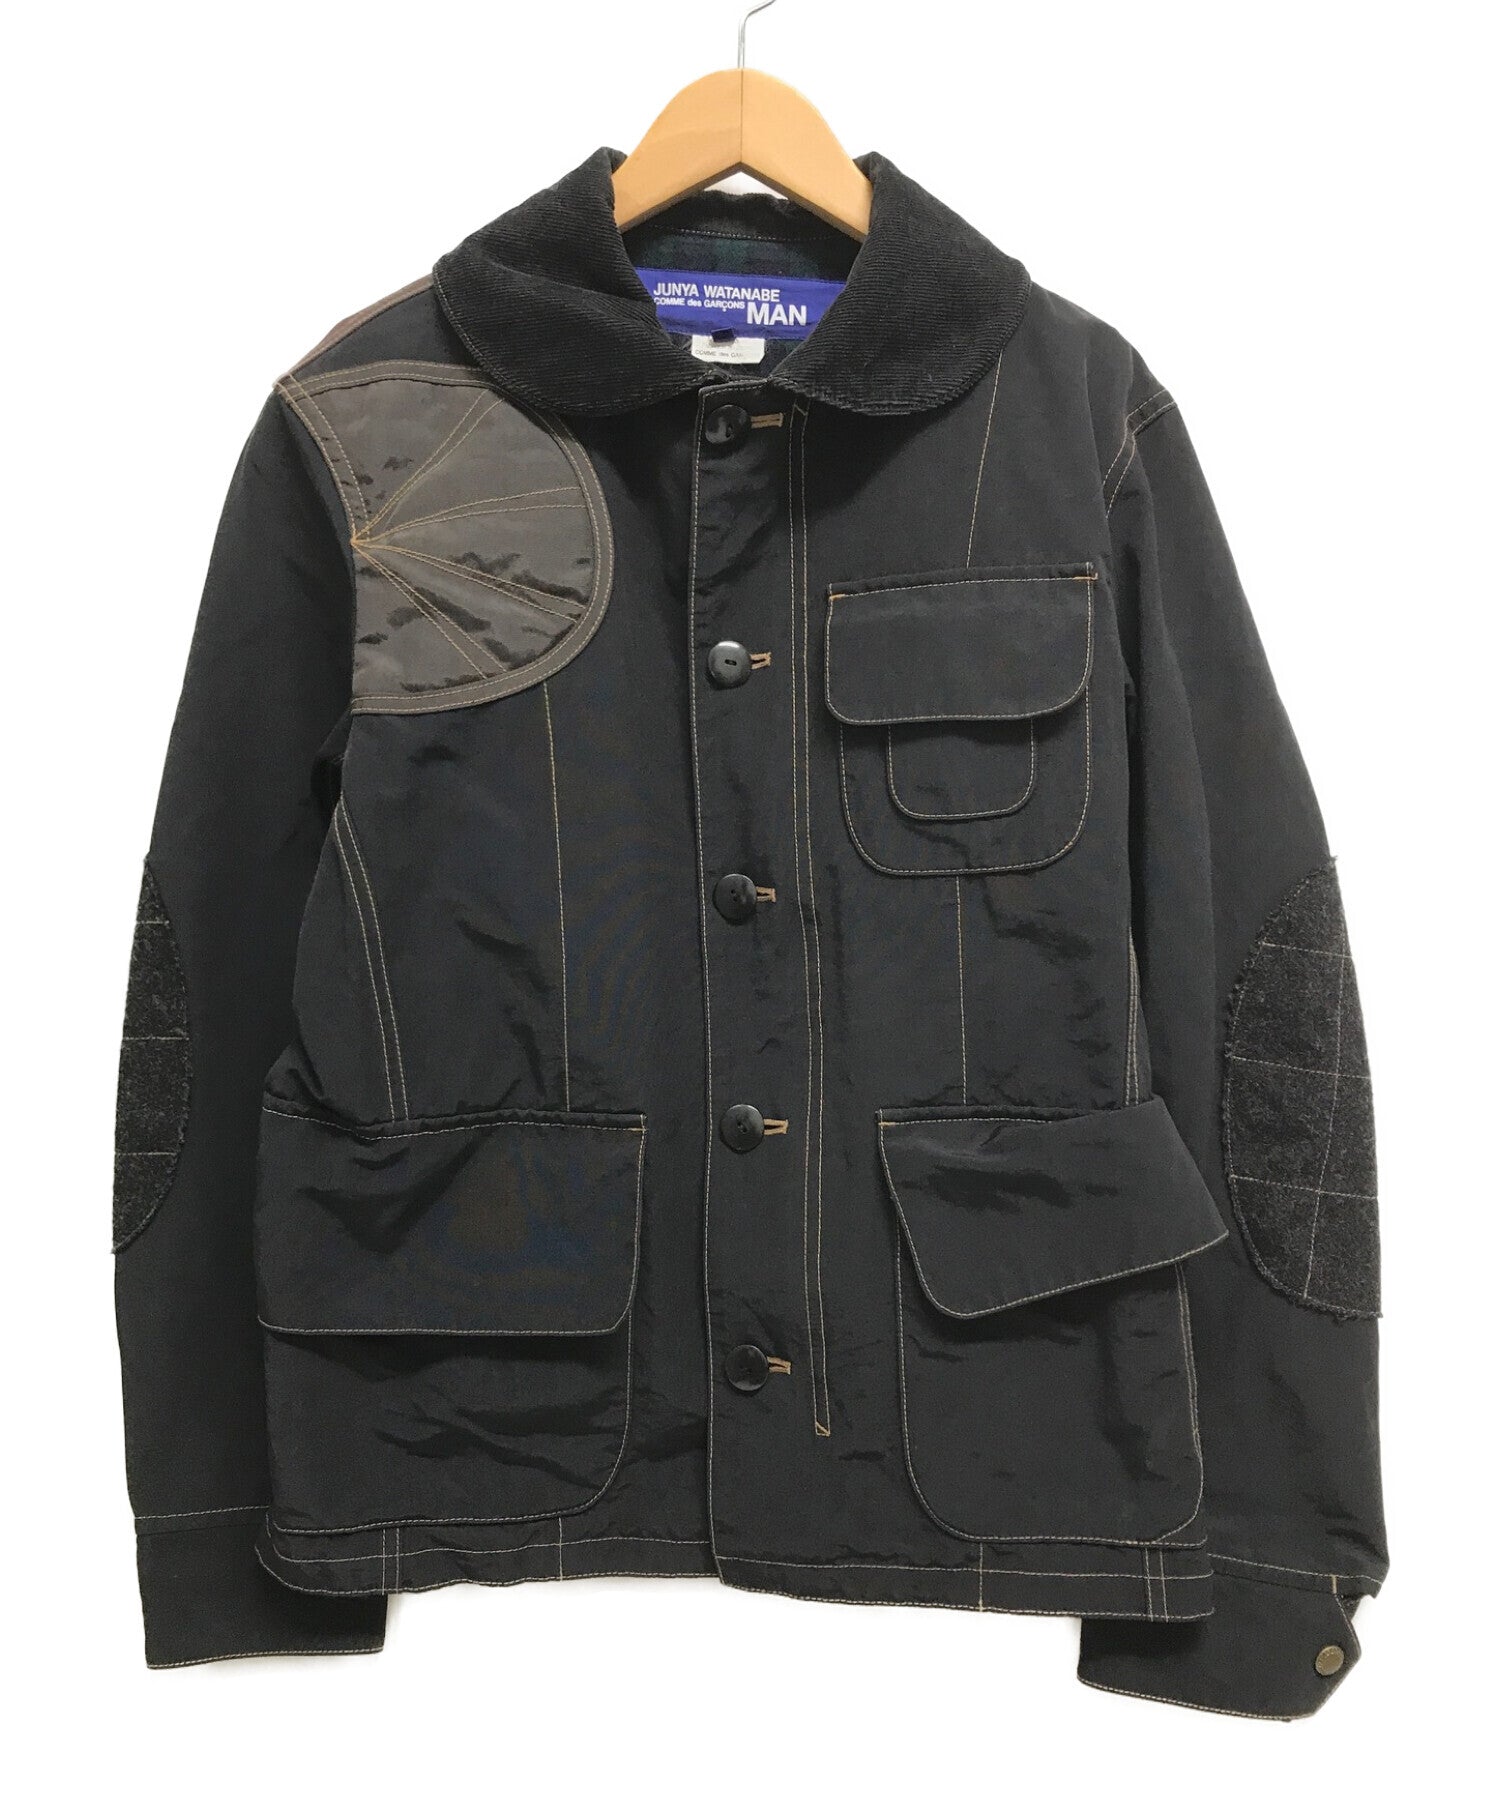 COMME des GARCONS JUNYA WATANABE MAN Coverall Jacket Elbow Patch